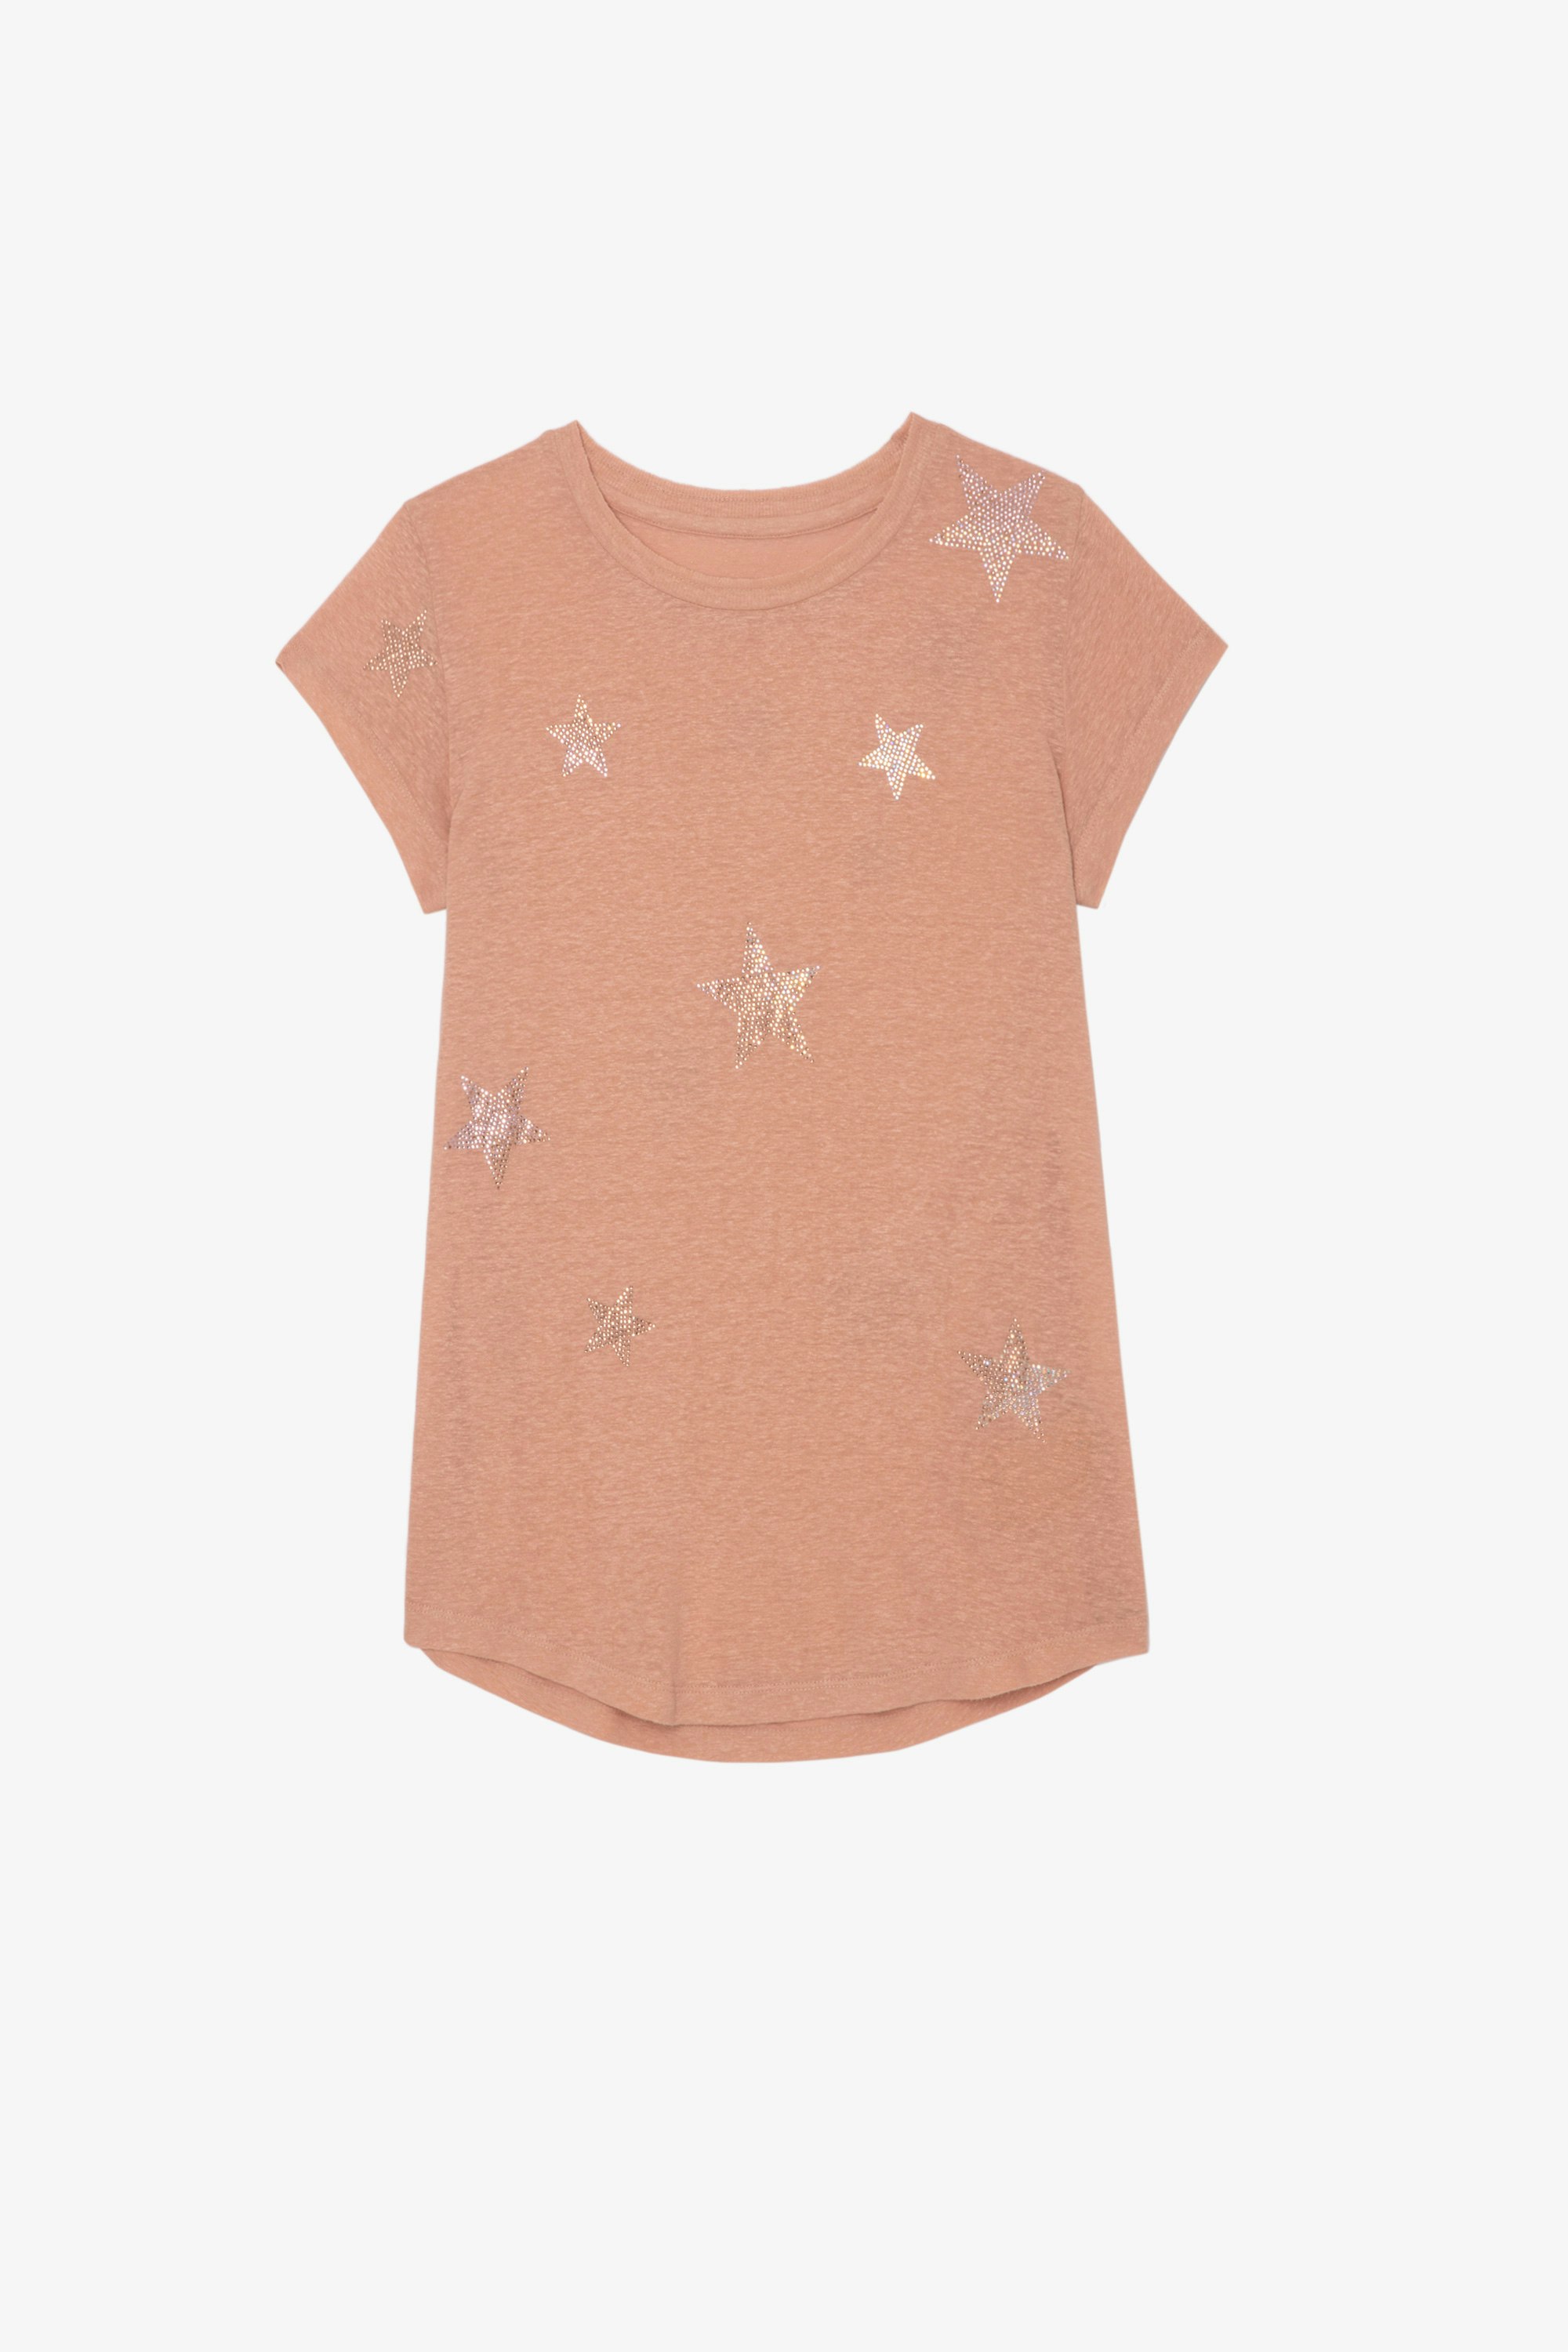 Skinny Stars Ｔシャツ Women’s pink cotton T-shirt with short sleeves and ZV wings motif on the back